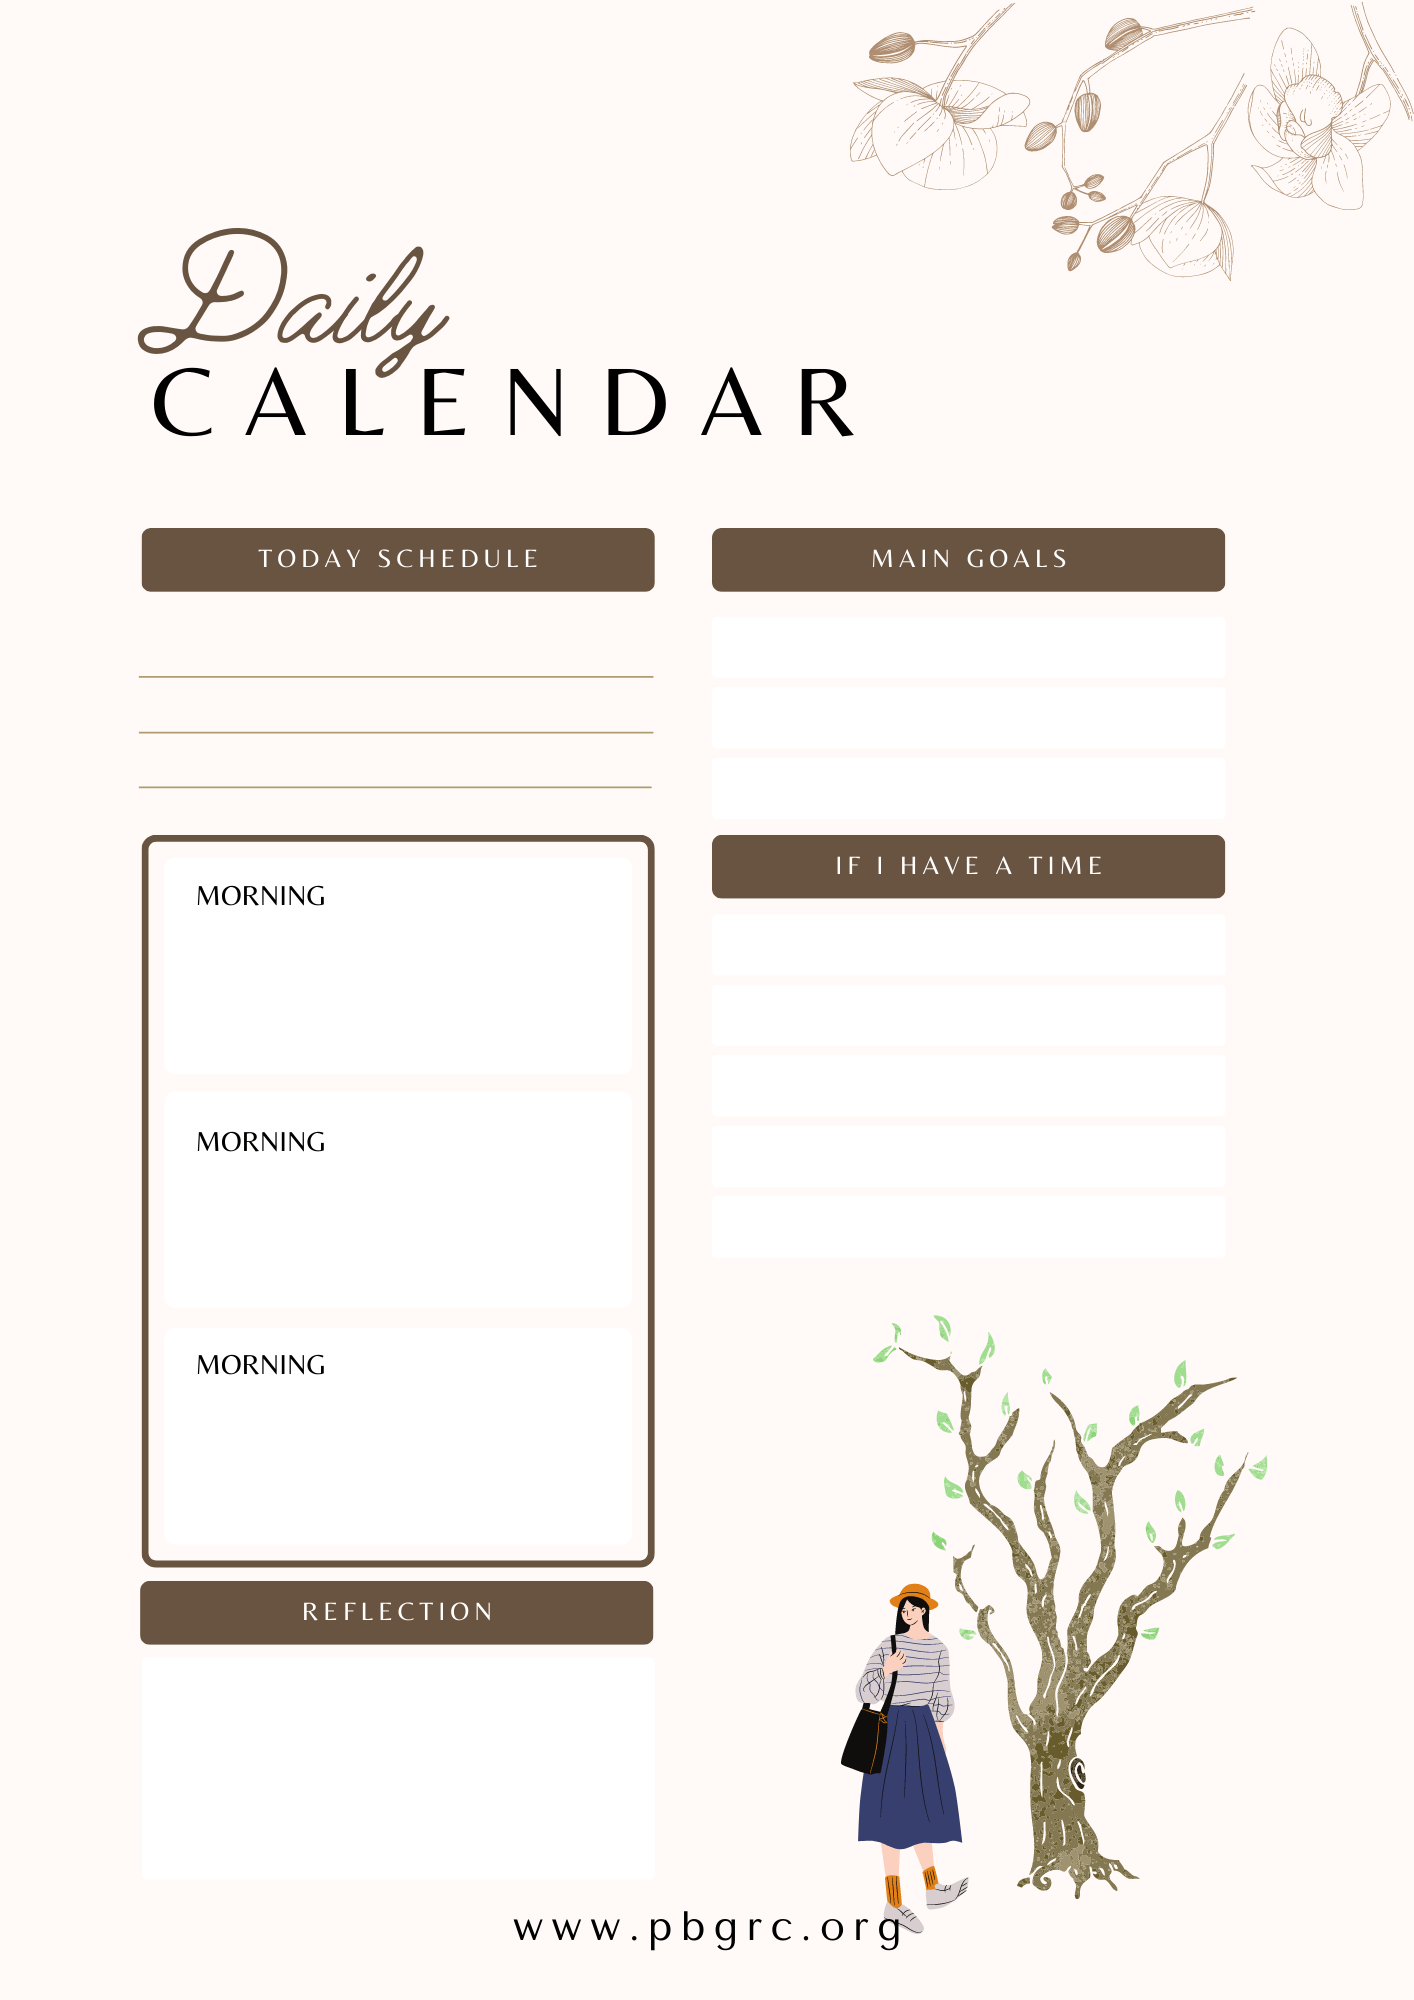 Excel Daily Calendar Template for Productivity Tracking